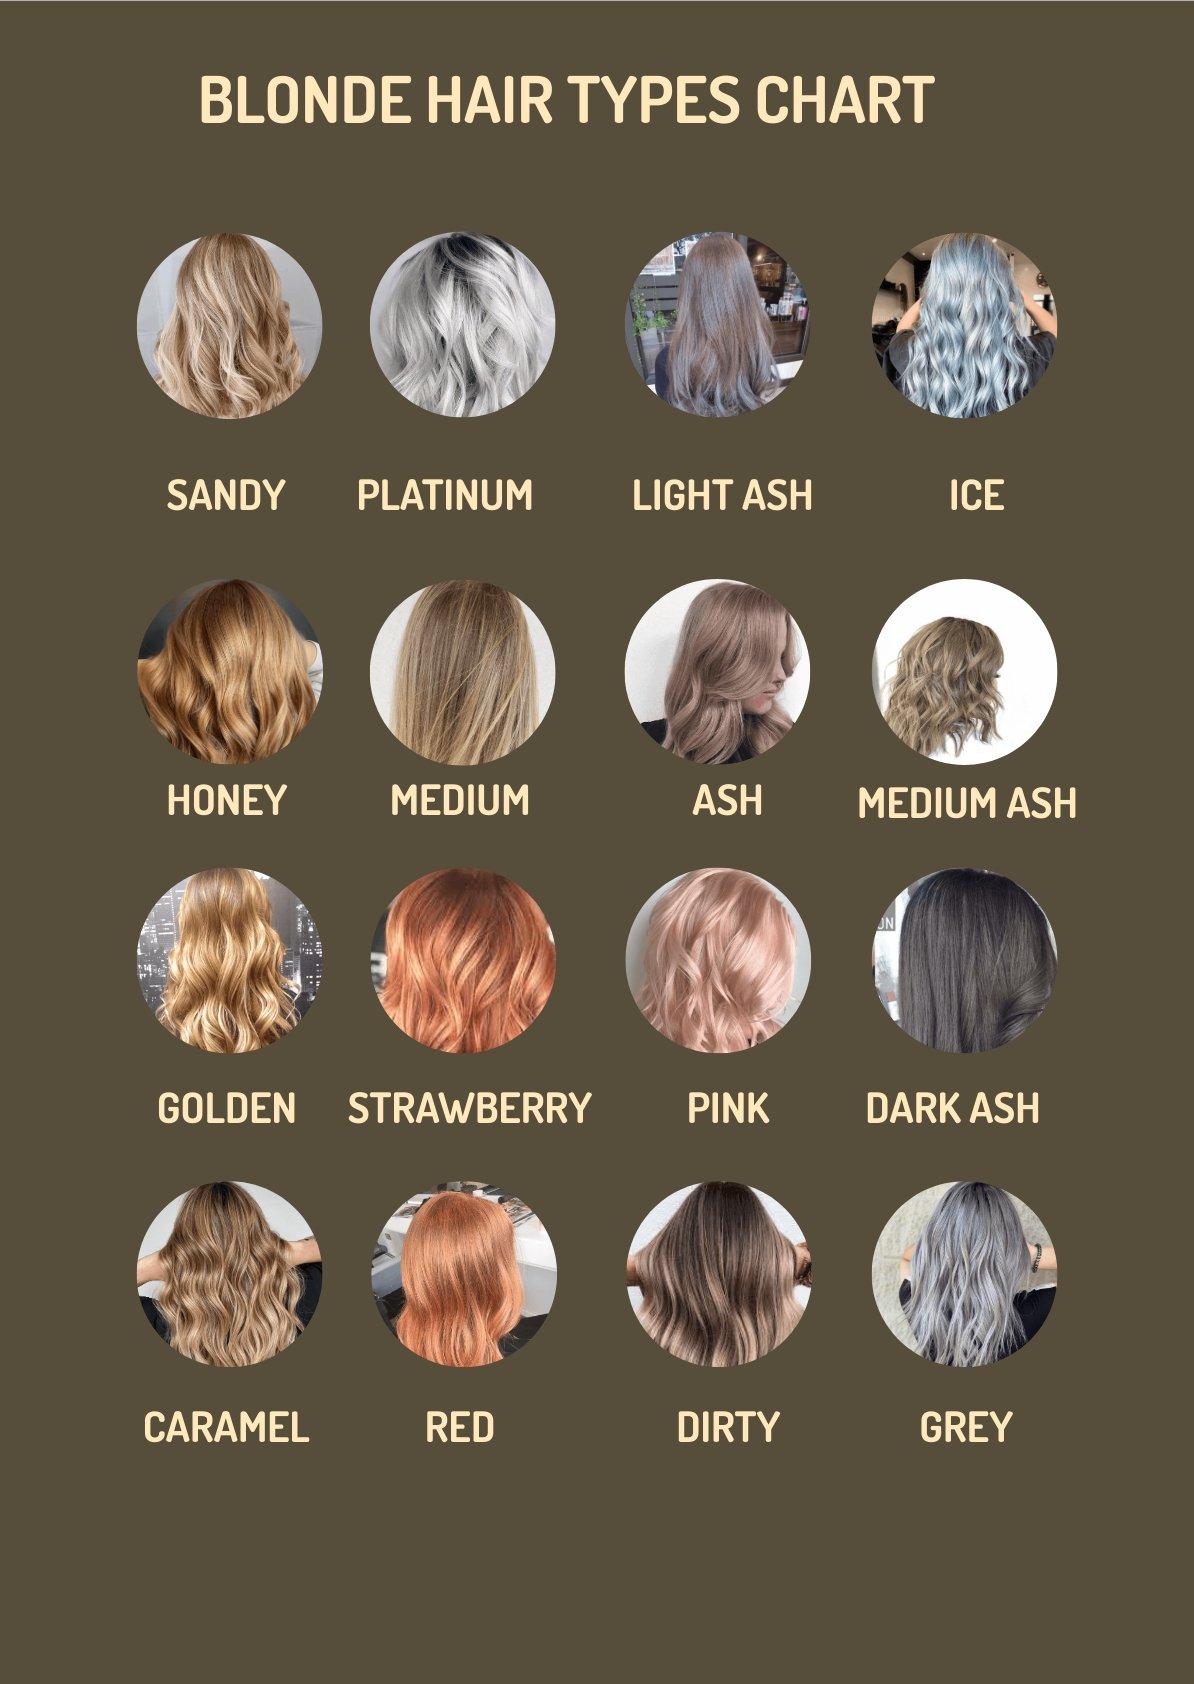 Free Hair Chart Template - Download in Word, Apple Pages | Template.net